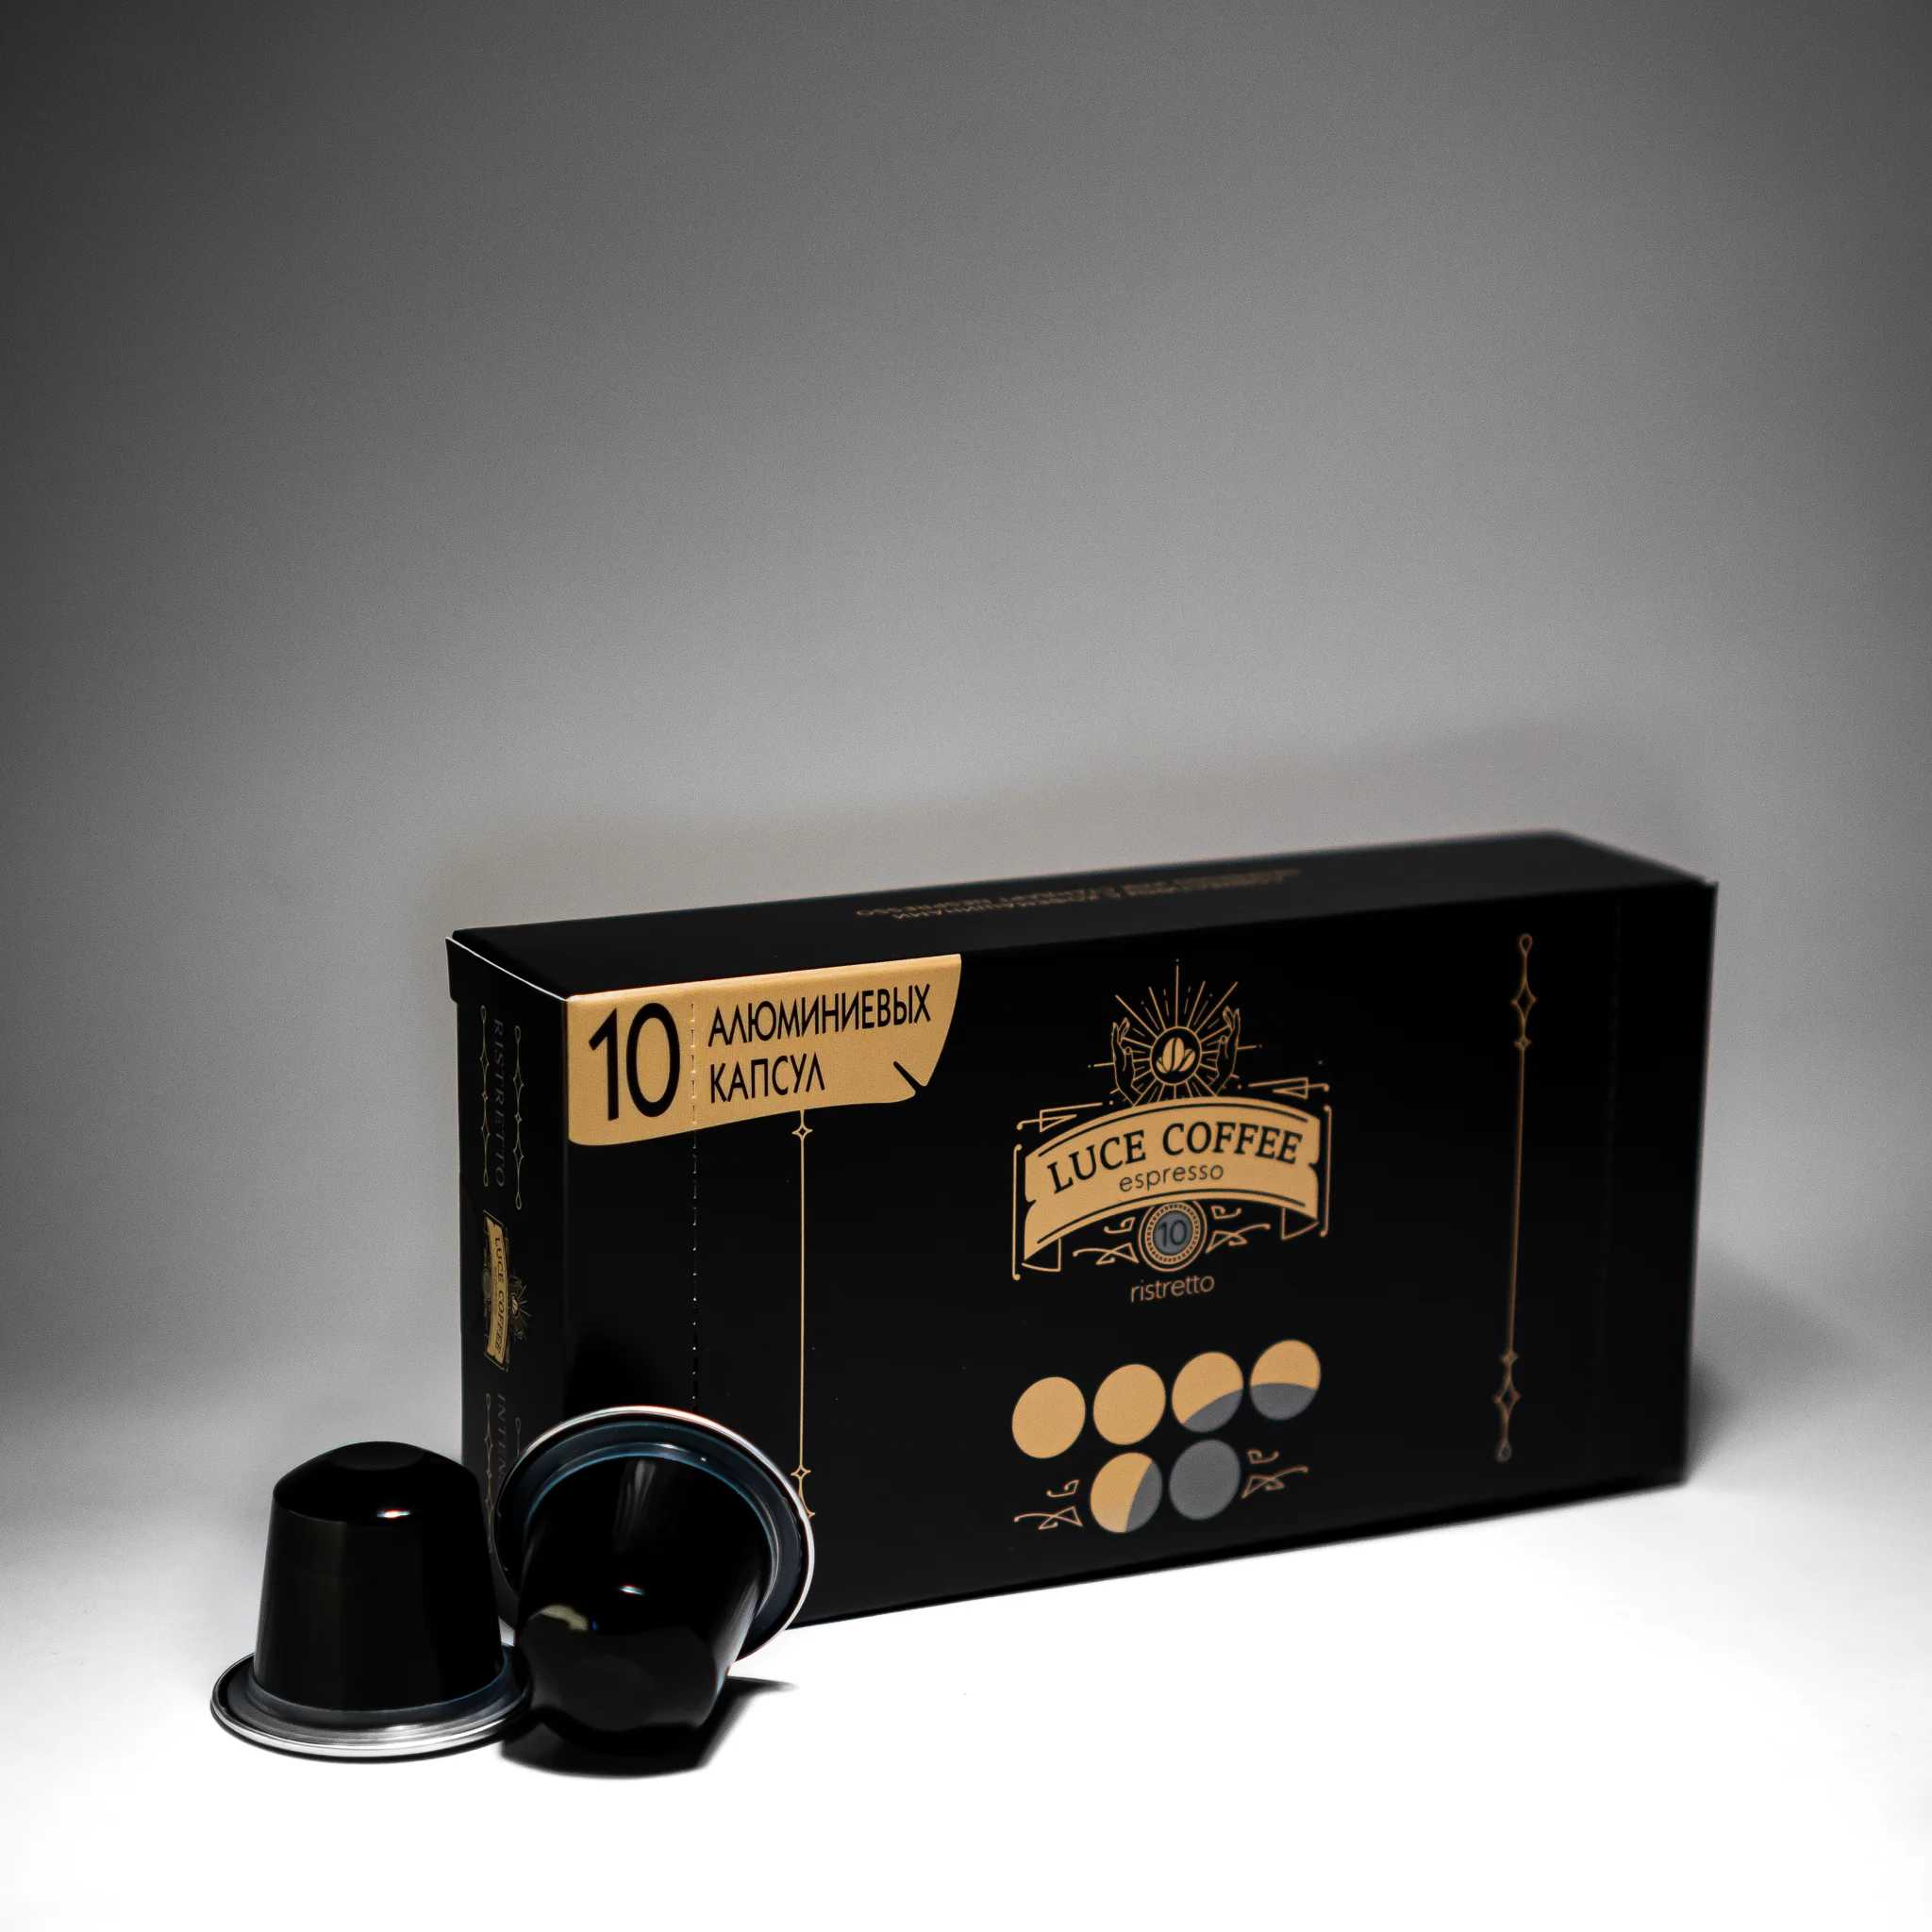 Coffee capsules LUCE COFFEE 10 RISTRETTO - 10 pieces